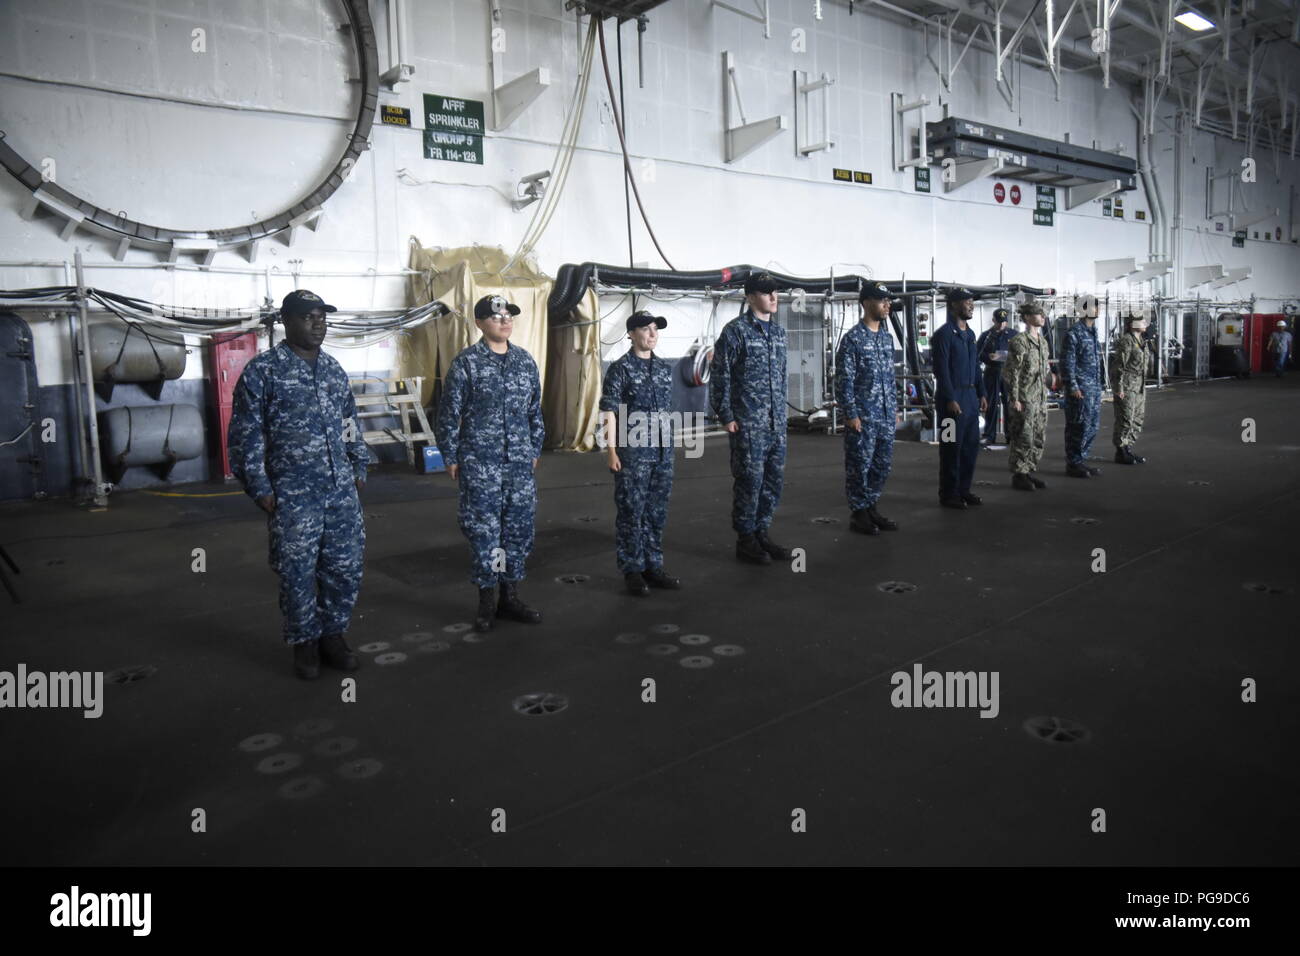 180820-N-MY760-068   PORTSMOUTH, Va. (Aug. 20, 2018) Sailors aboard the aircraft carrier USS Dwight D. Eisenhower (CVN 69)(Ike) stand at attention preparing to receive their Surface Warfare pins. Ike is undergoing a Planned Incremental Availability (PIA) at Norfolk Naval Shipyard during the maintenance phase of the Optimized Fleet Response Plan (OFRP). (U.S. Navy photo by Mass Communication Specialist Seaman Apprentice Tyler Miller) Stock Photo